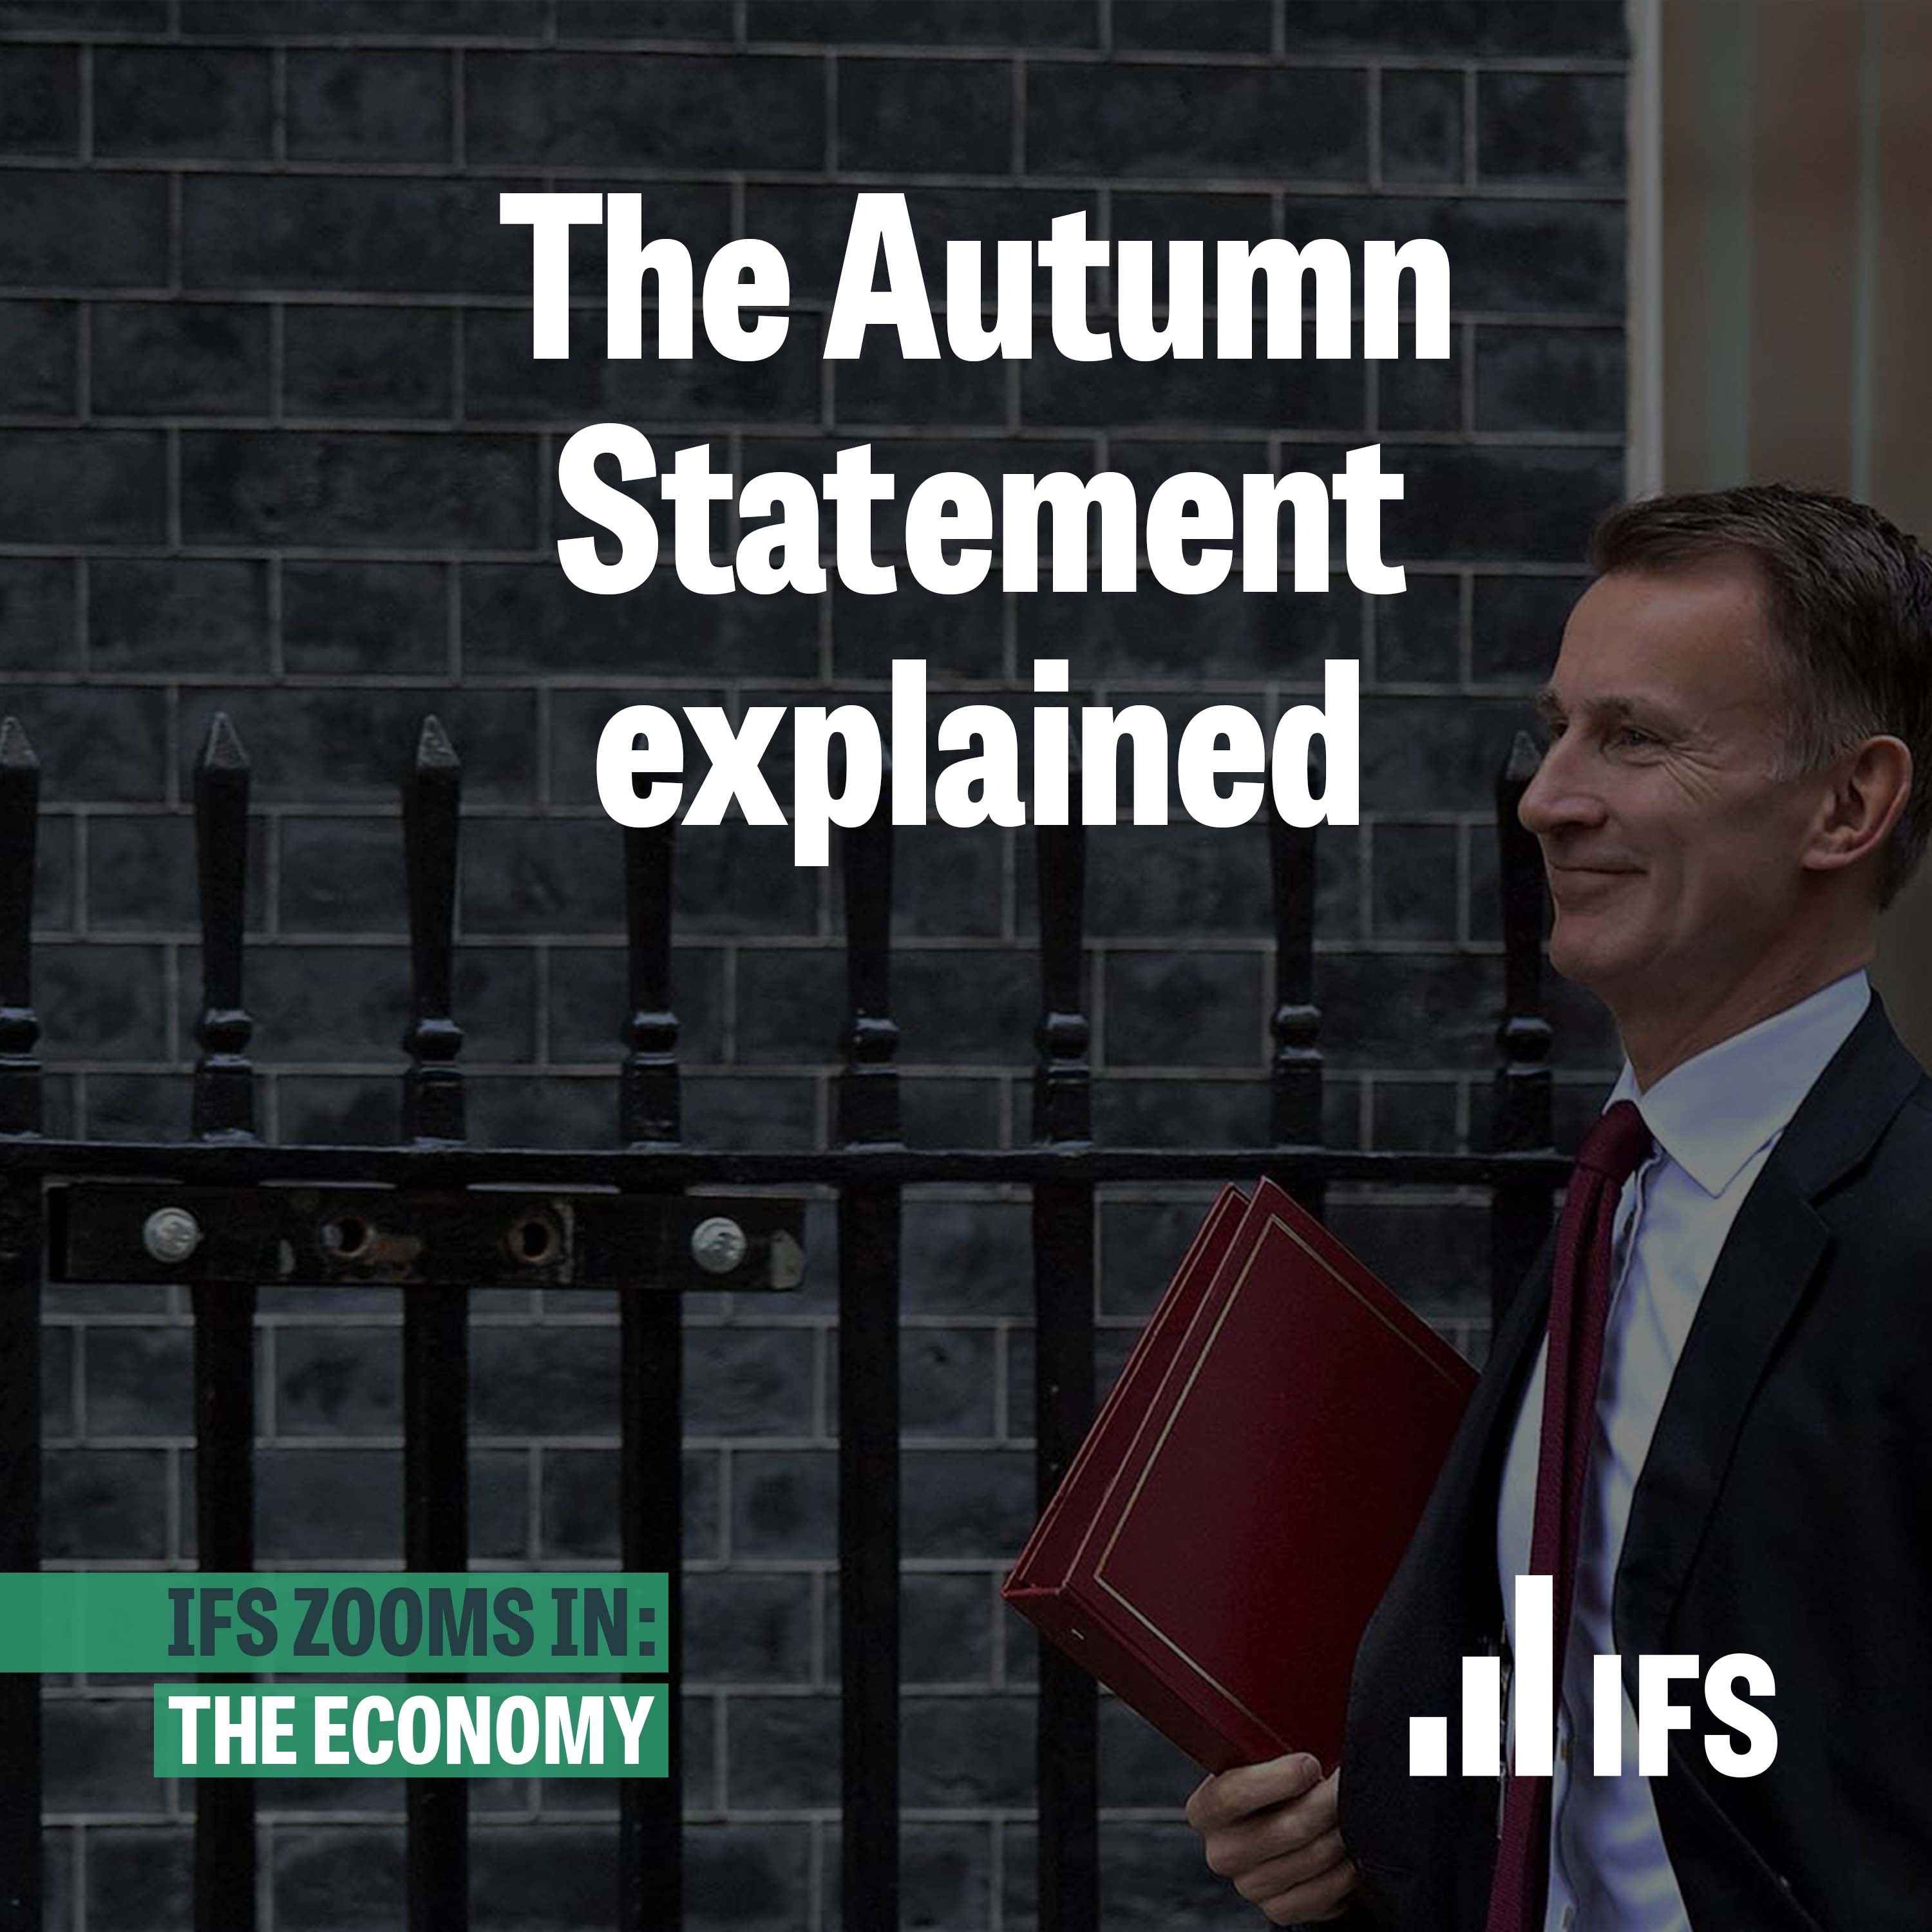 The Autumn Statement explained